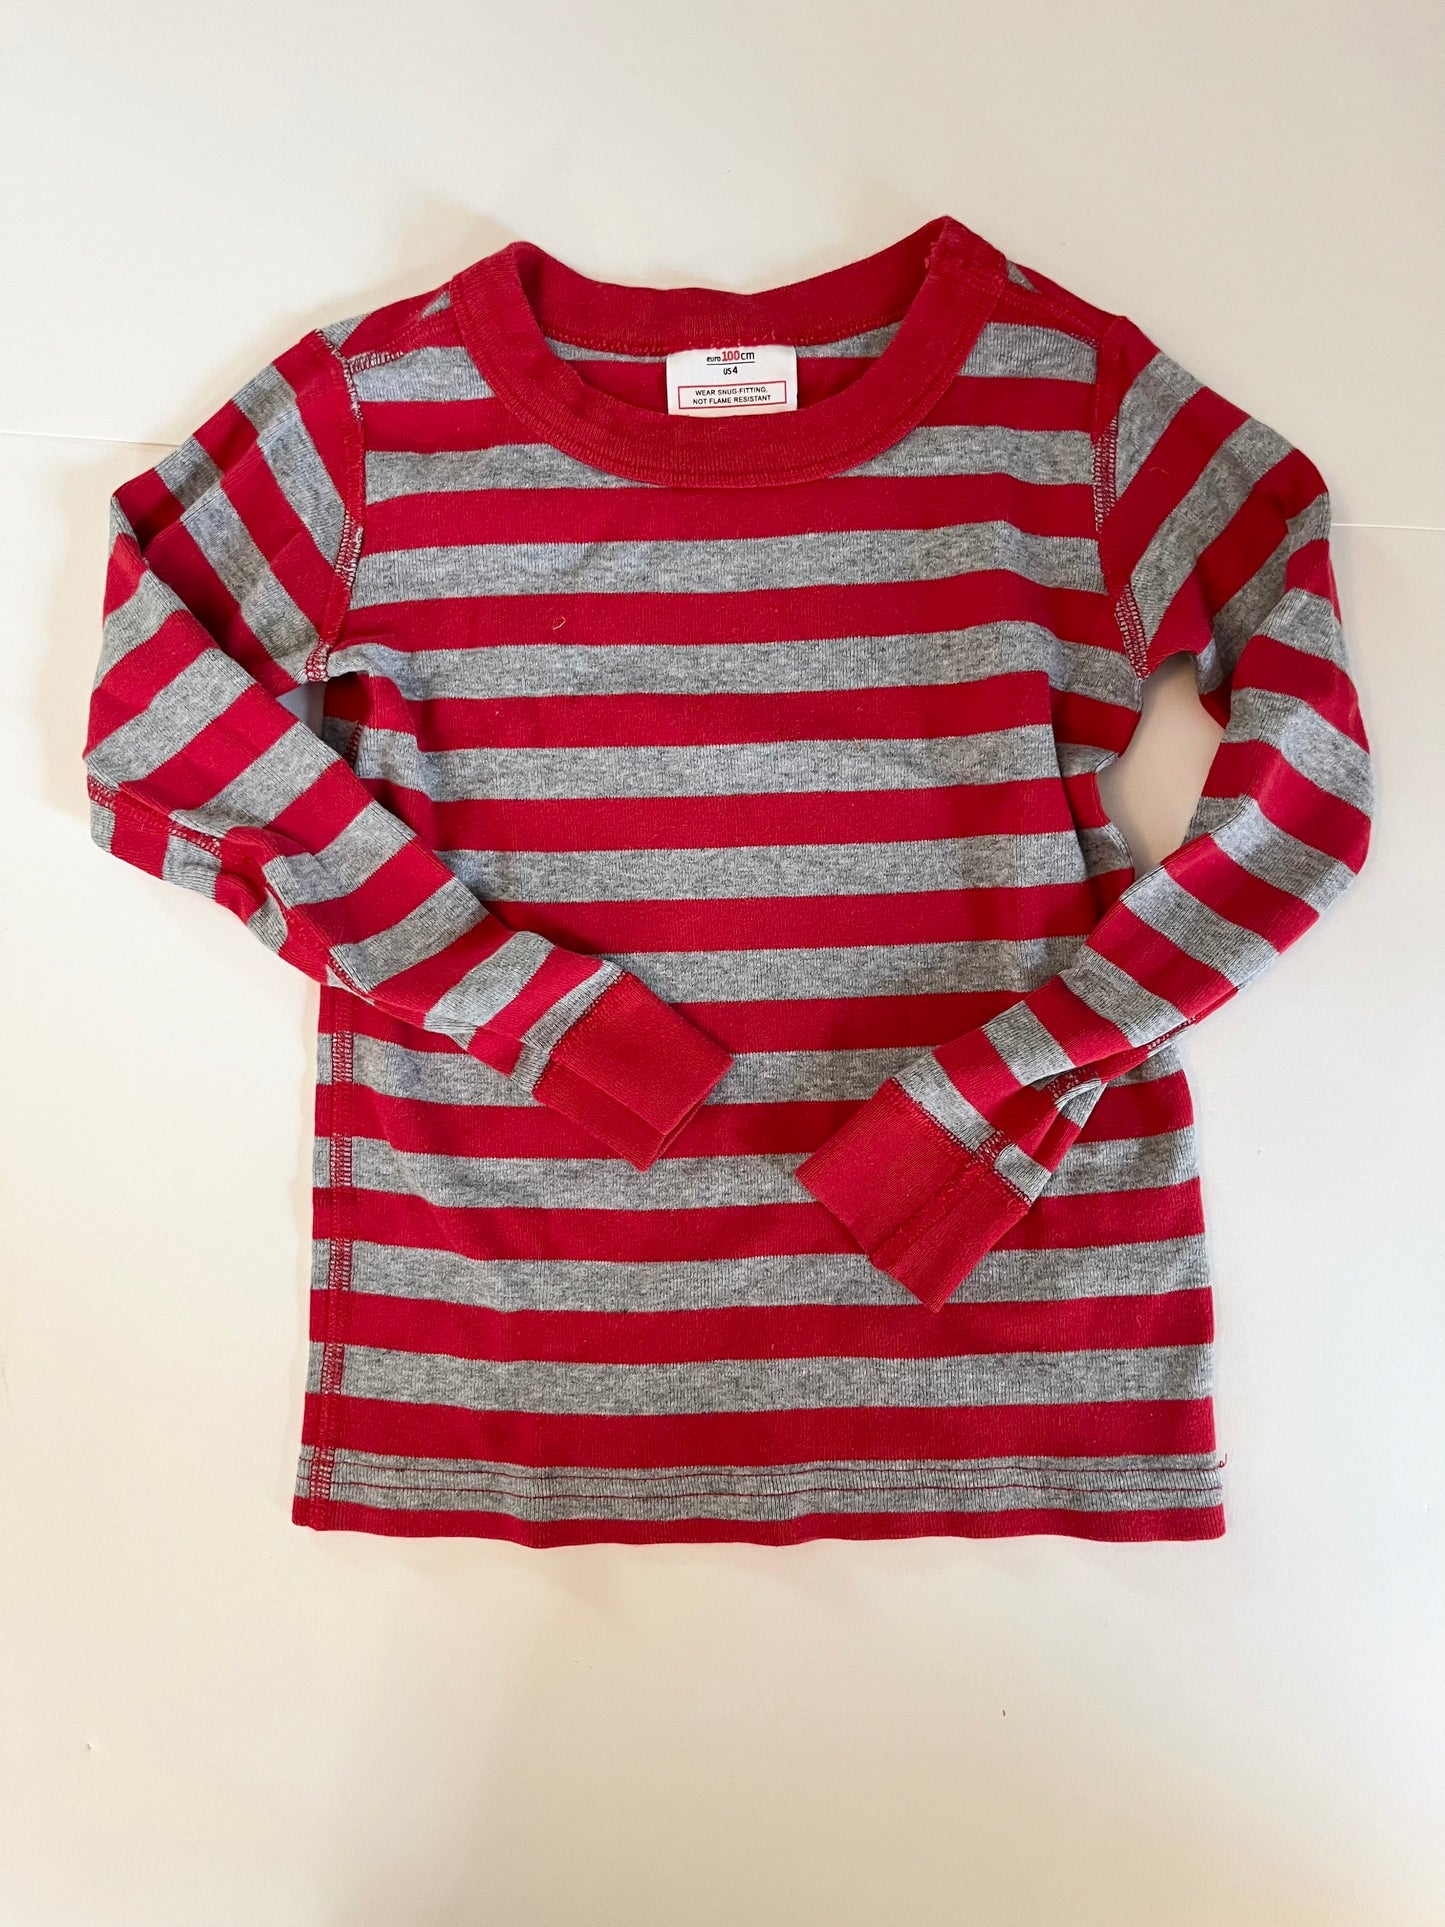 4t 100 Hanna Andersson red gray striped pajama top